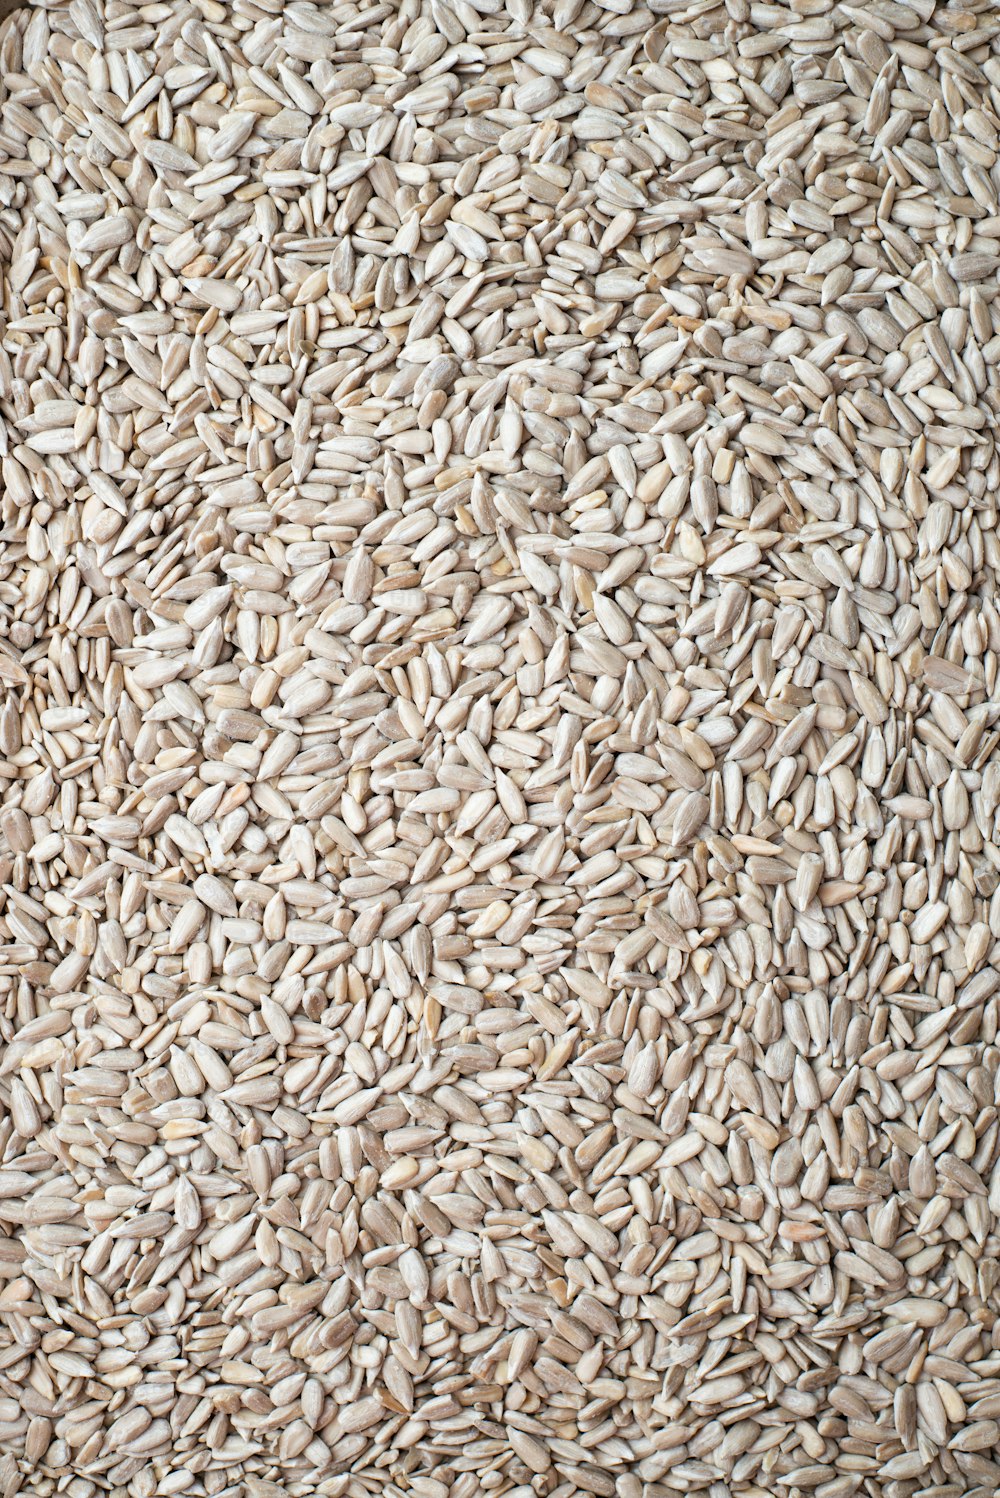 a close up of a pile of rice